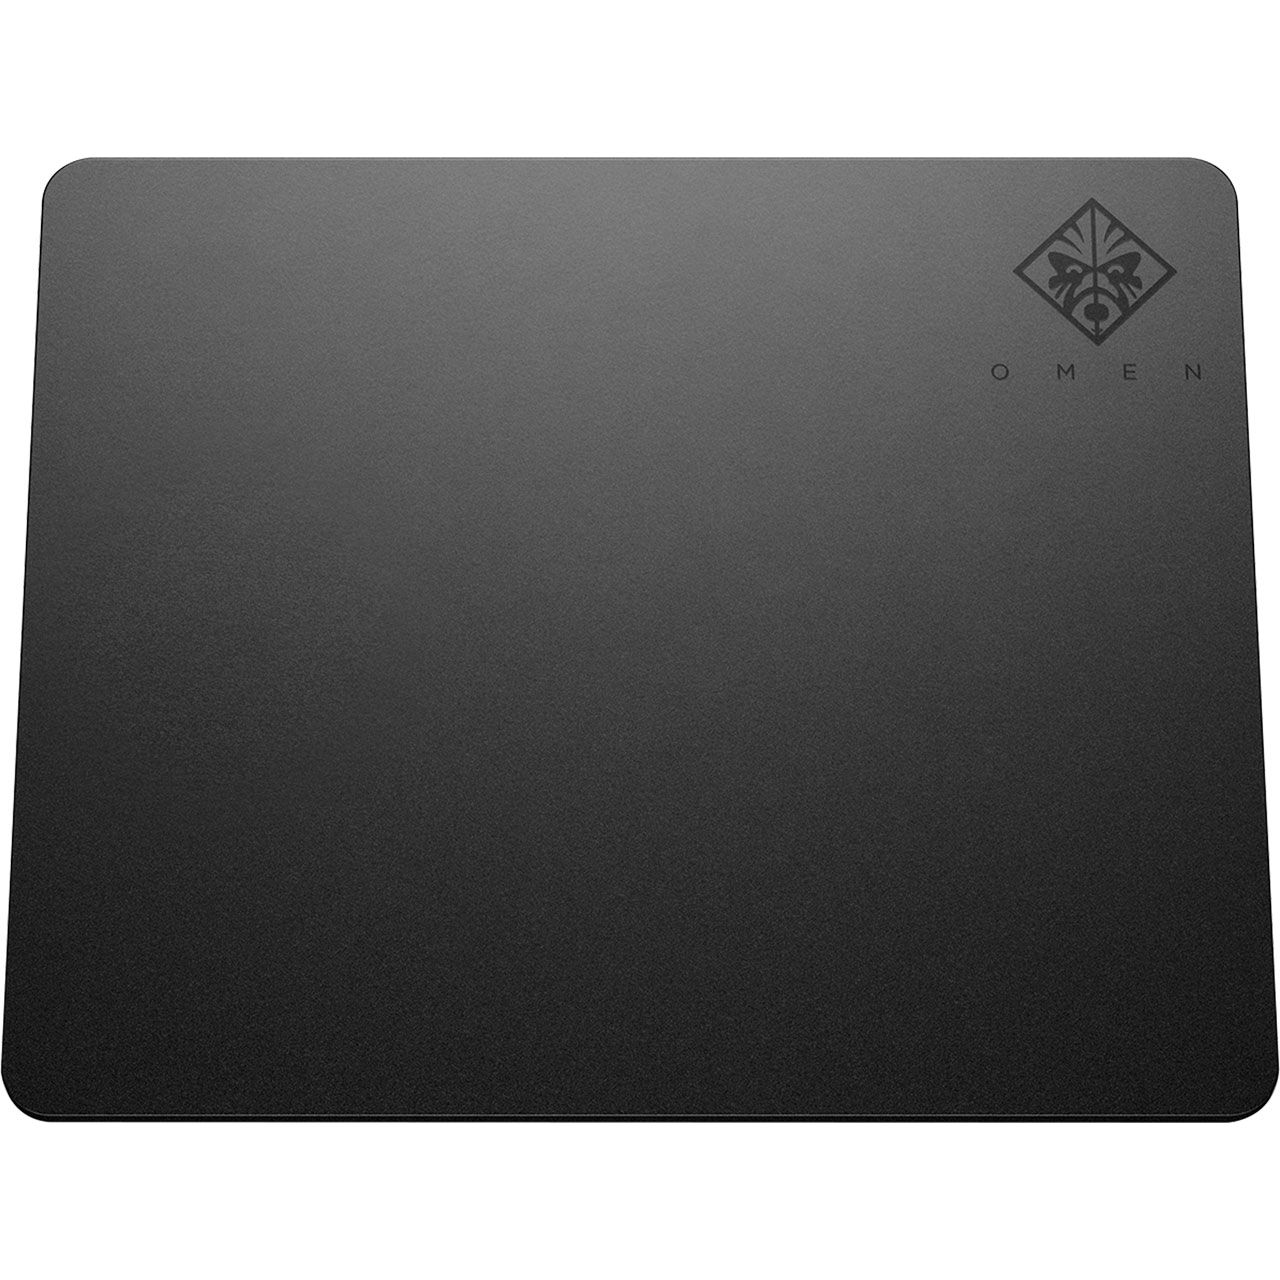 HP OMEN Gaming Mouse Pad 100 Review